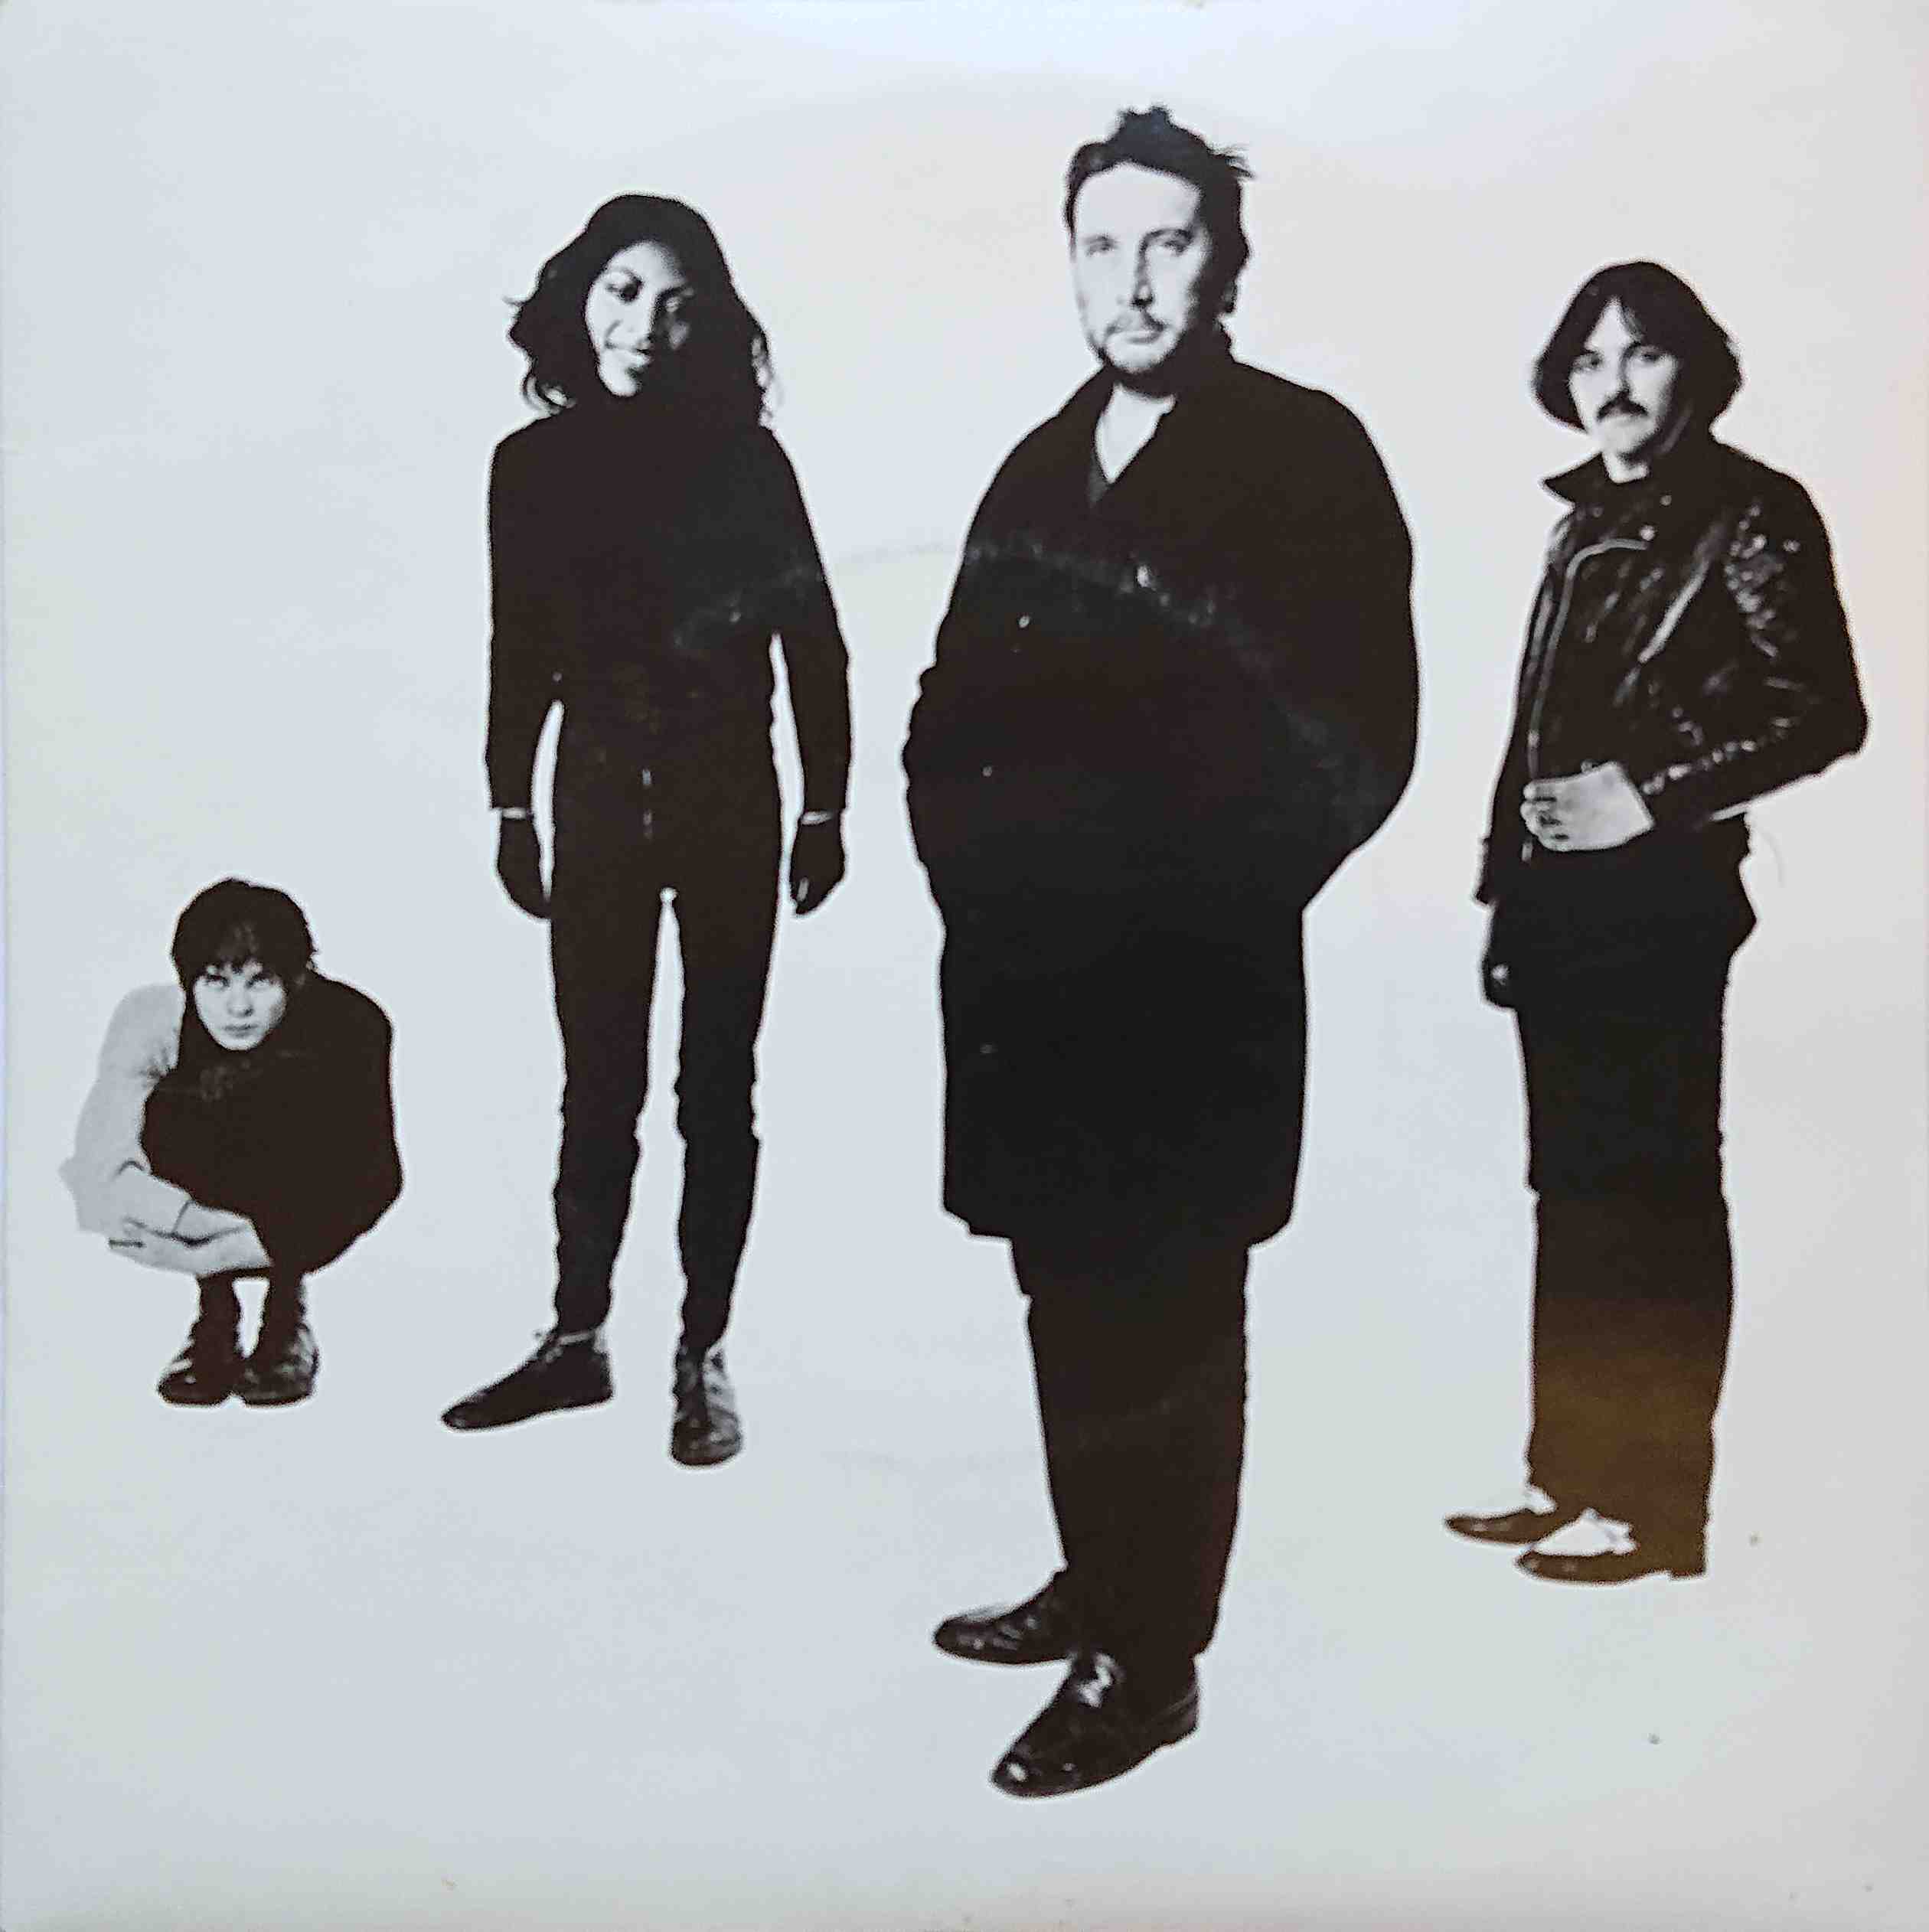 Picture of Walk on by by artist The Stranglers  from The Stranglers singles